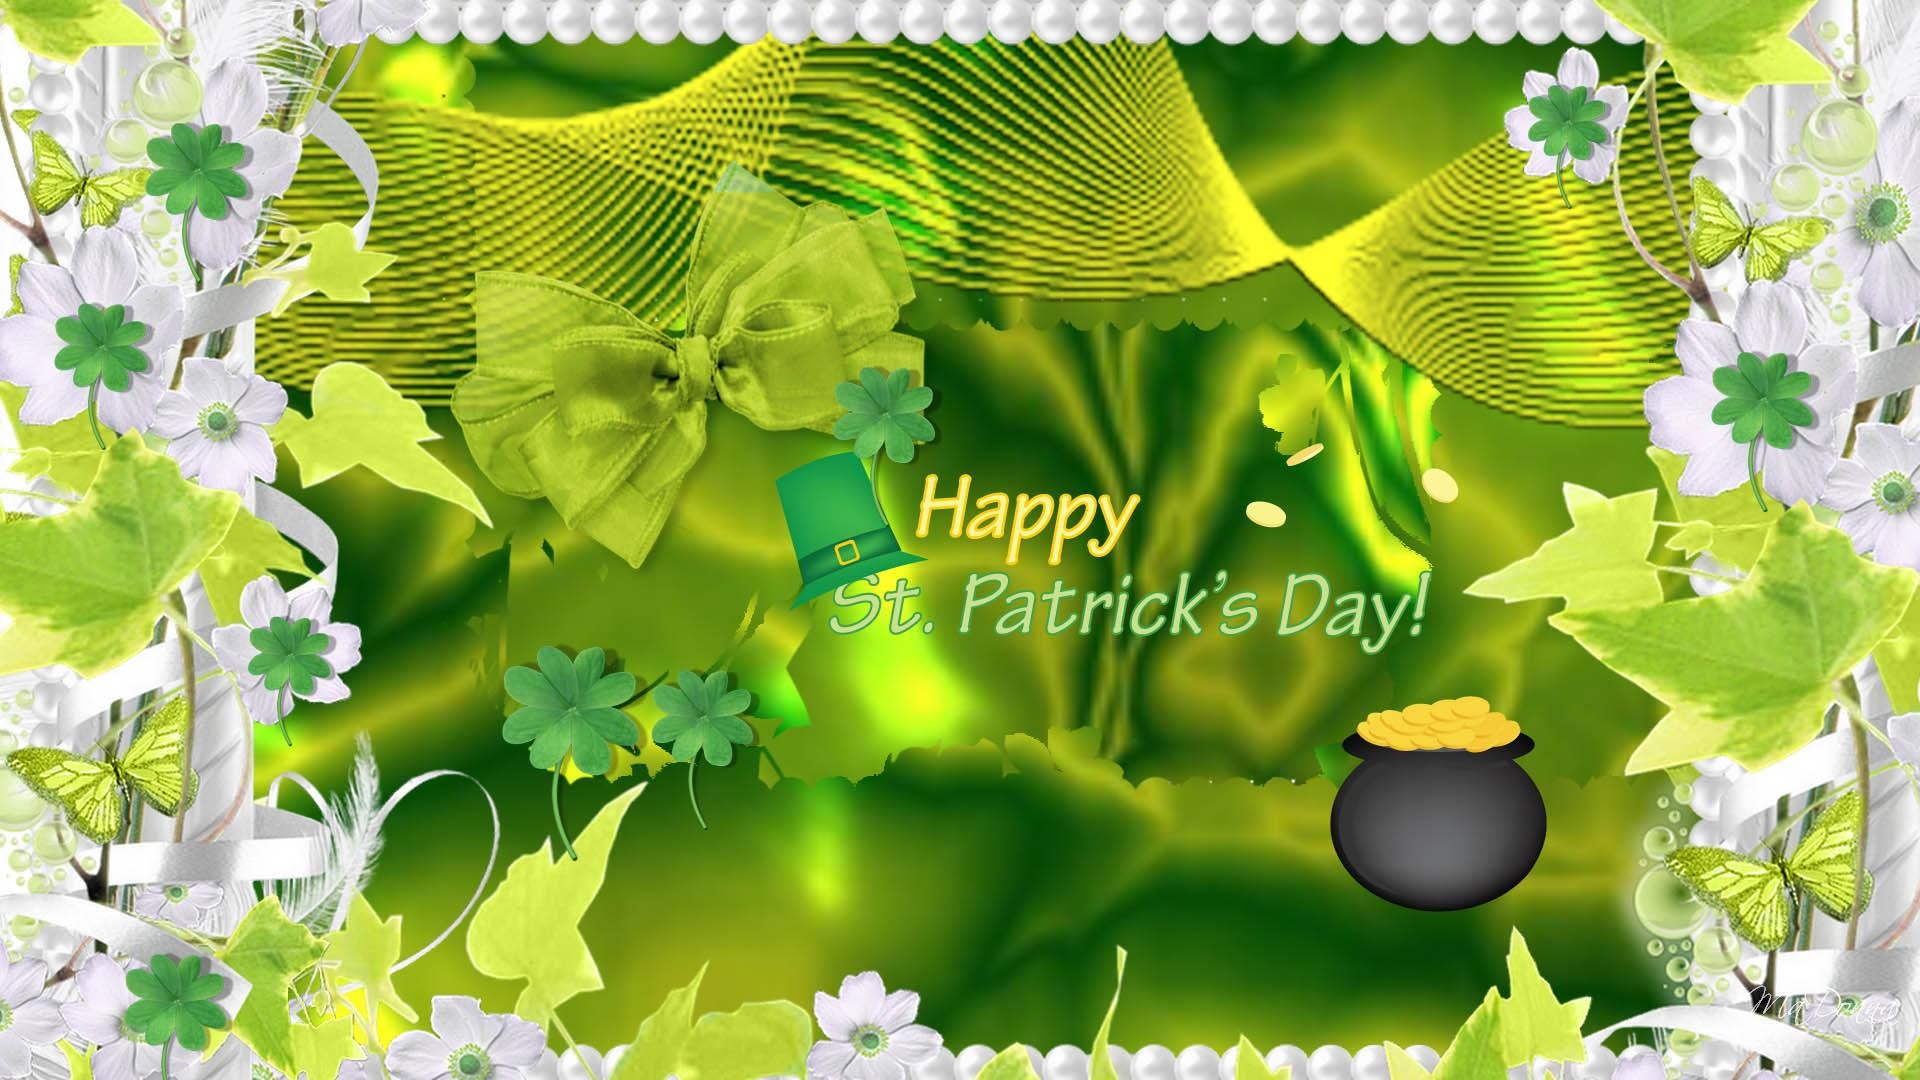  St Patrick's Day HD Android Wallpapers